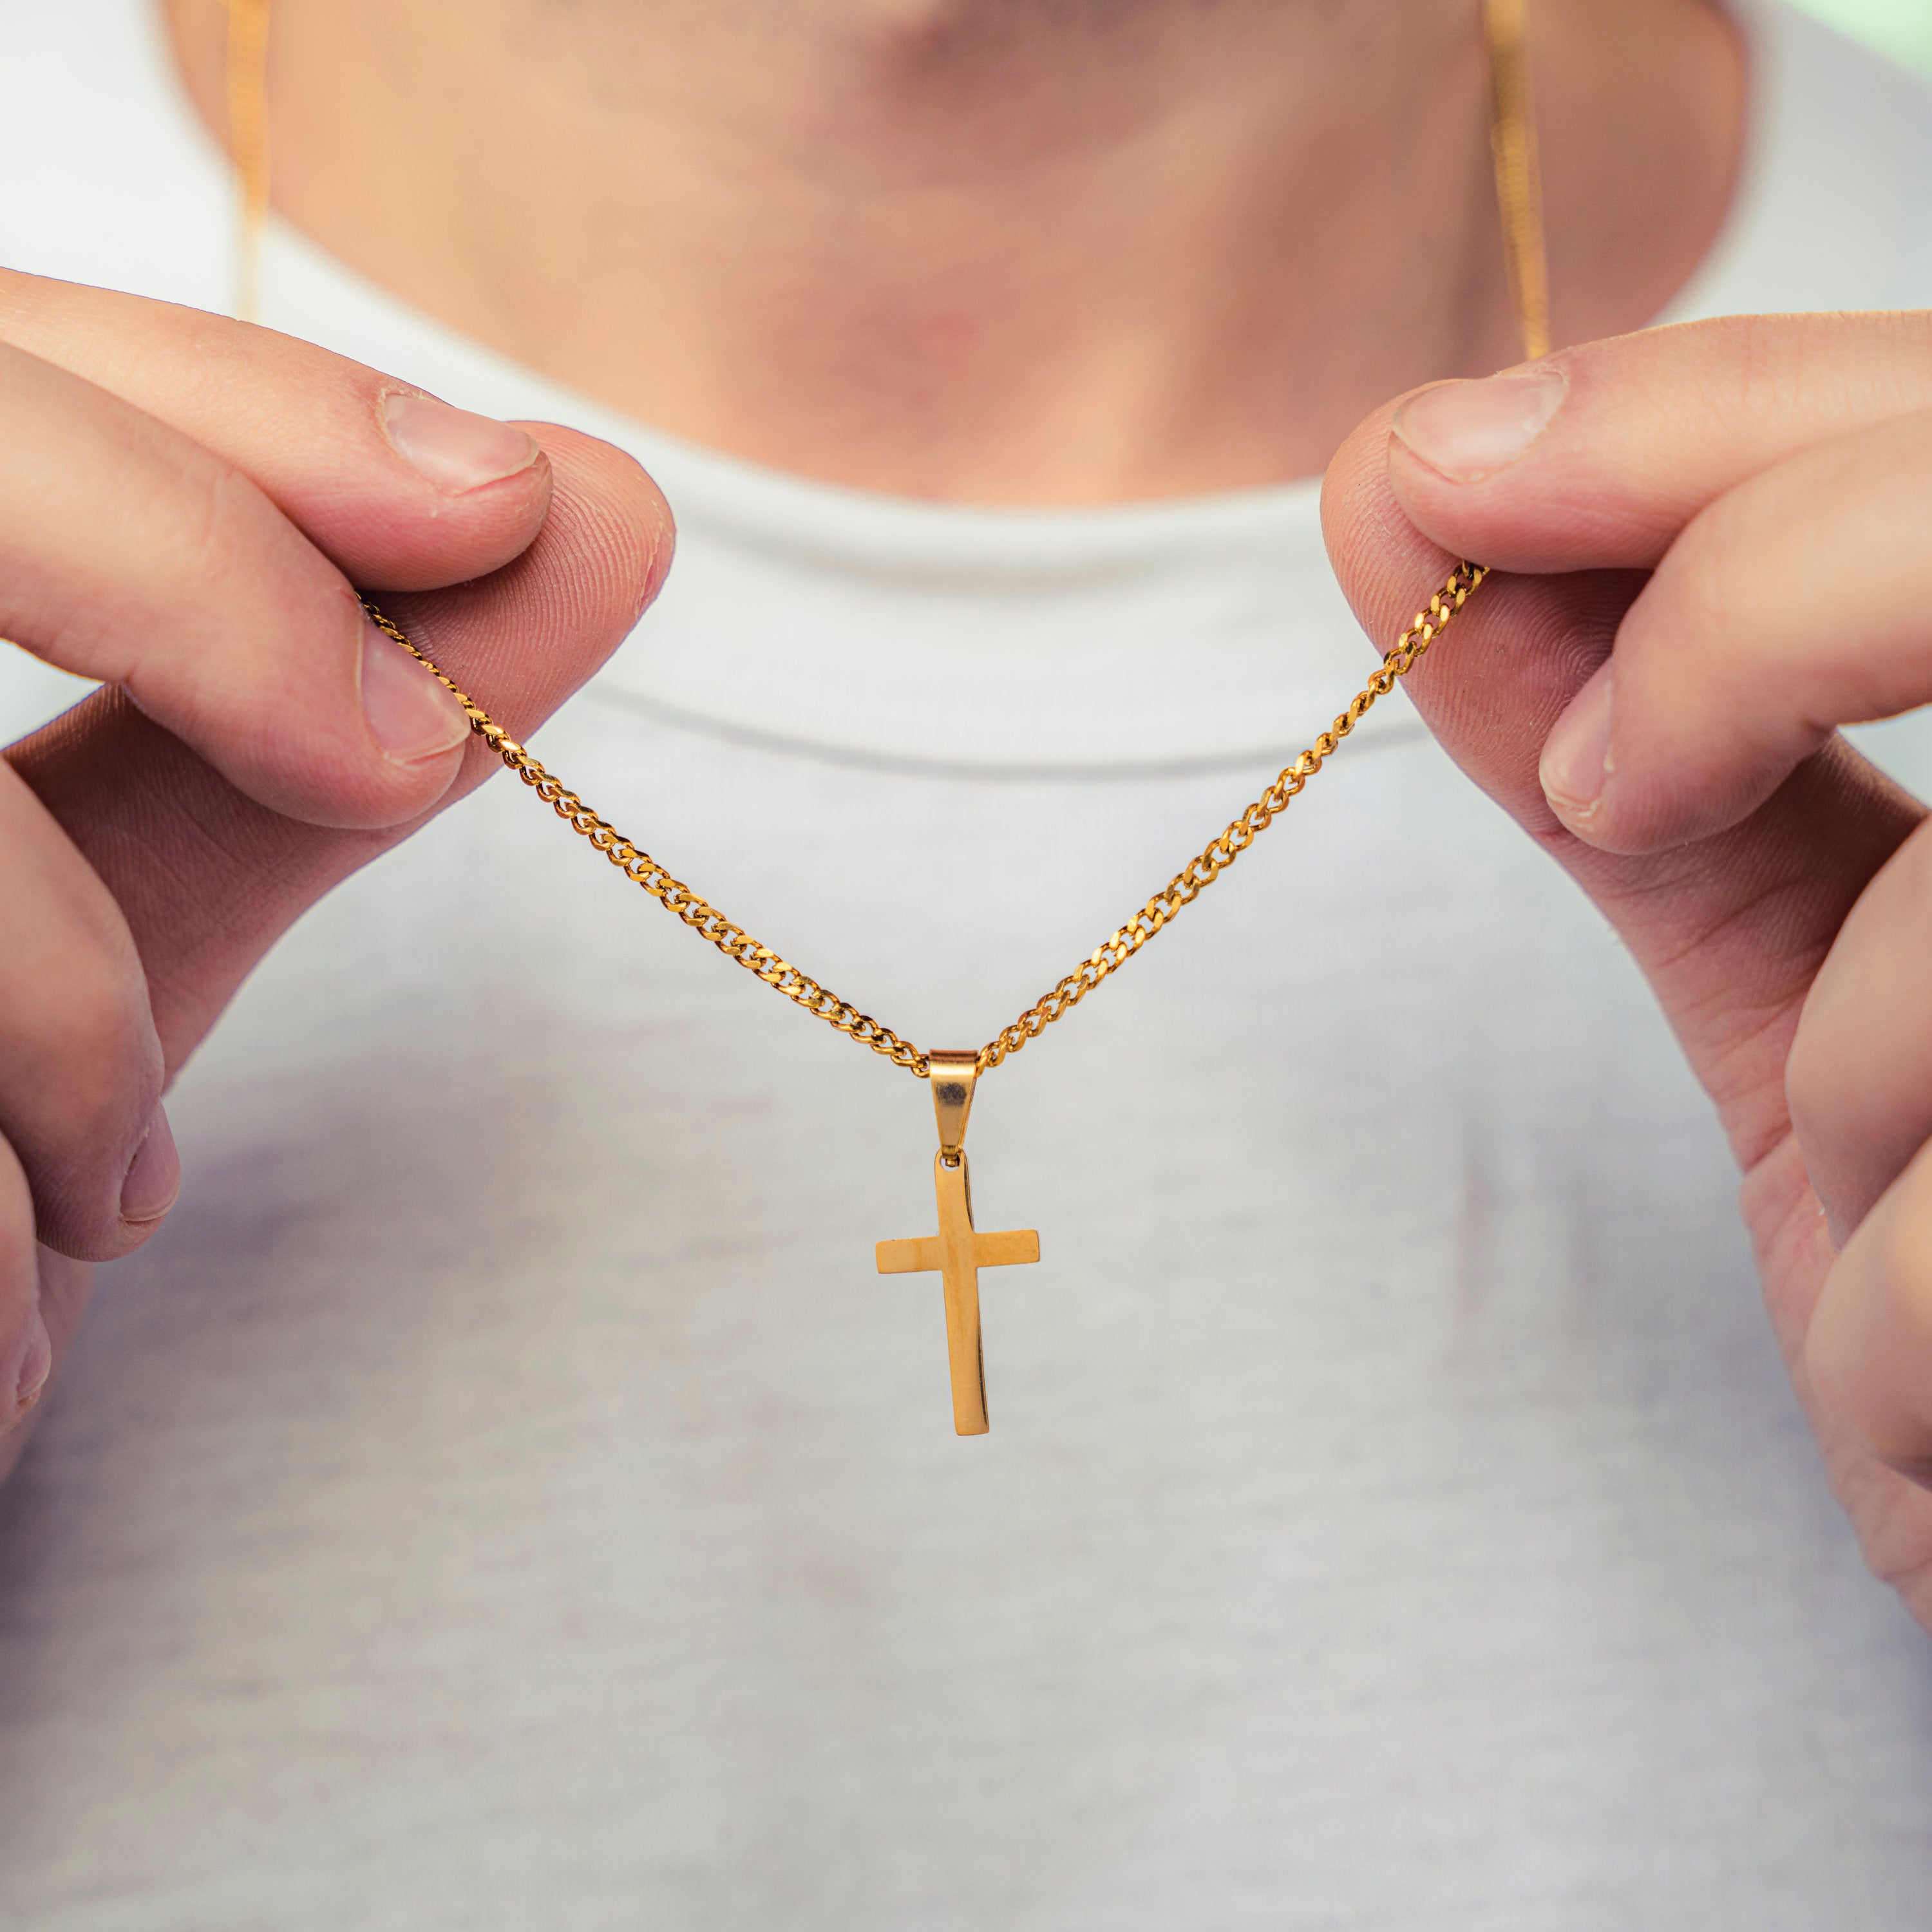 Surfer Necklace -Black Cross – Made by Nami US